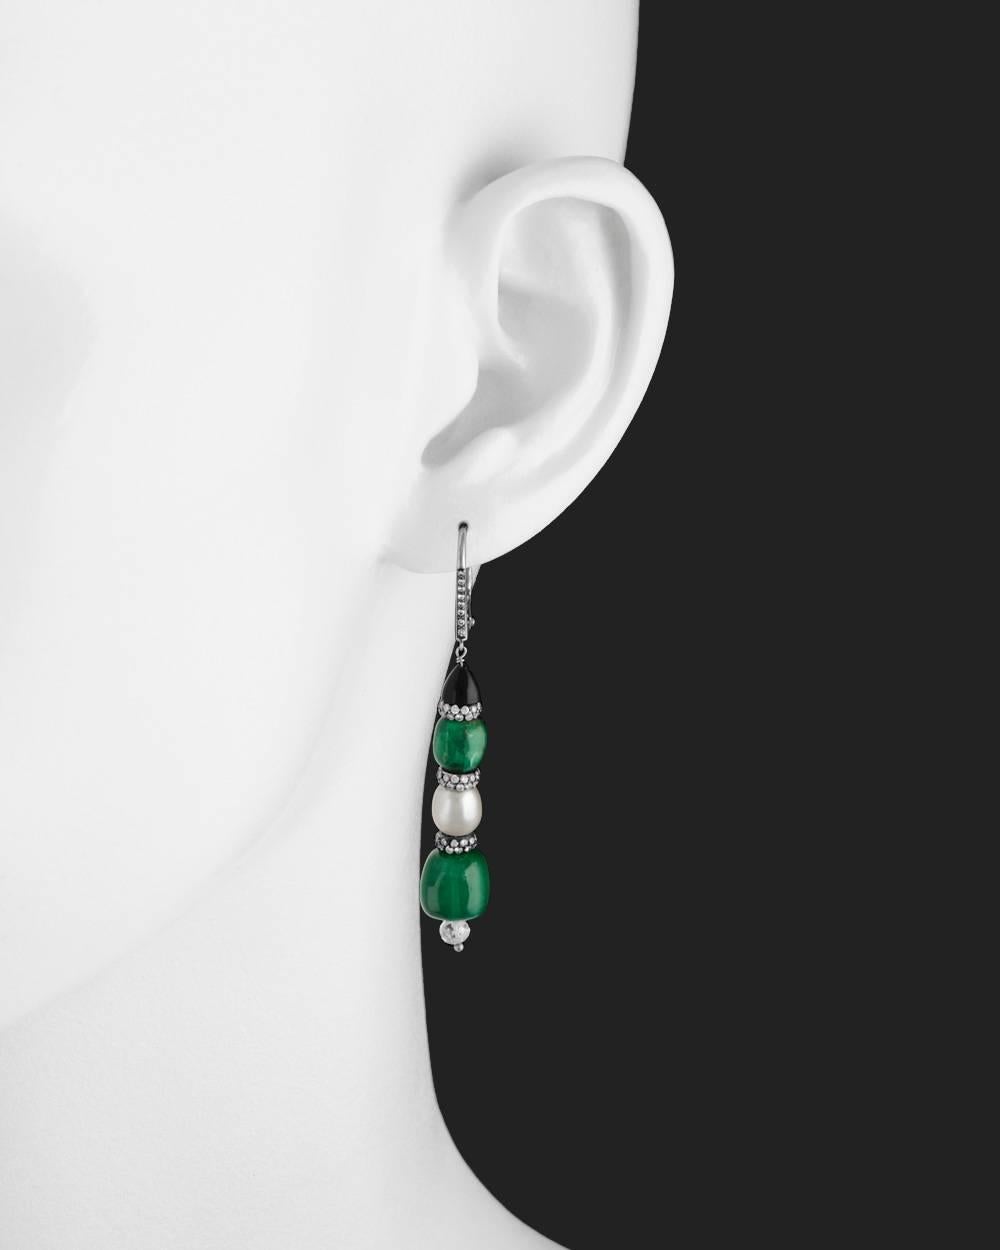 Chain drop earrings, showcasing four natural emerald beads and two natural pearls separated by diamond-set rondelles, with faceted diamond beads at base and black onyx cap surmounts, in platinum. The earrings suspended from diamond-set wires with